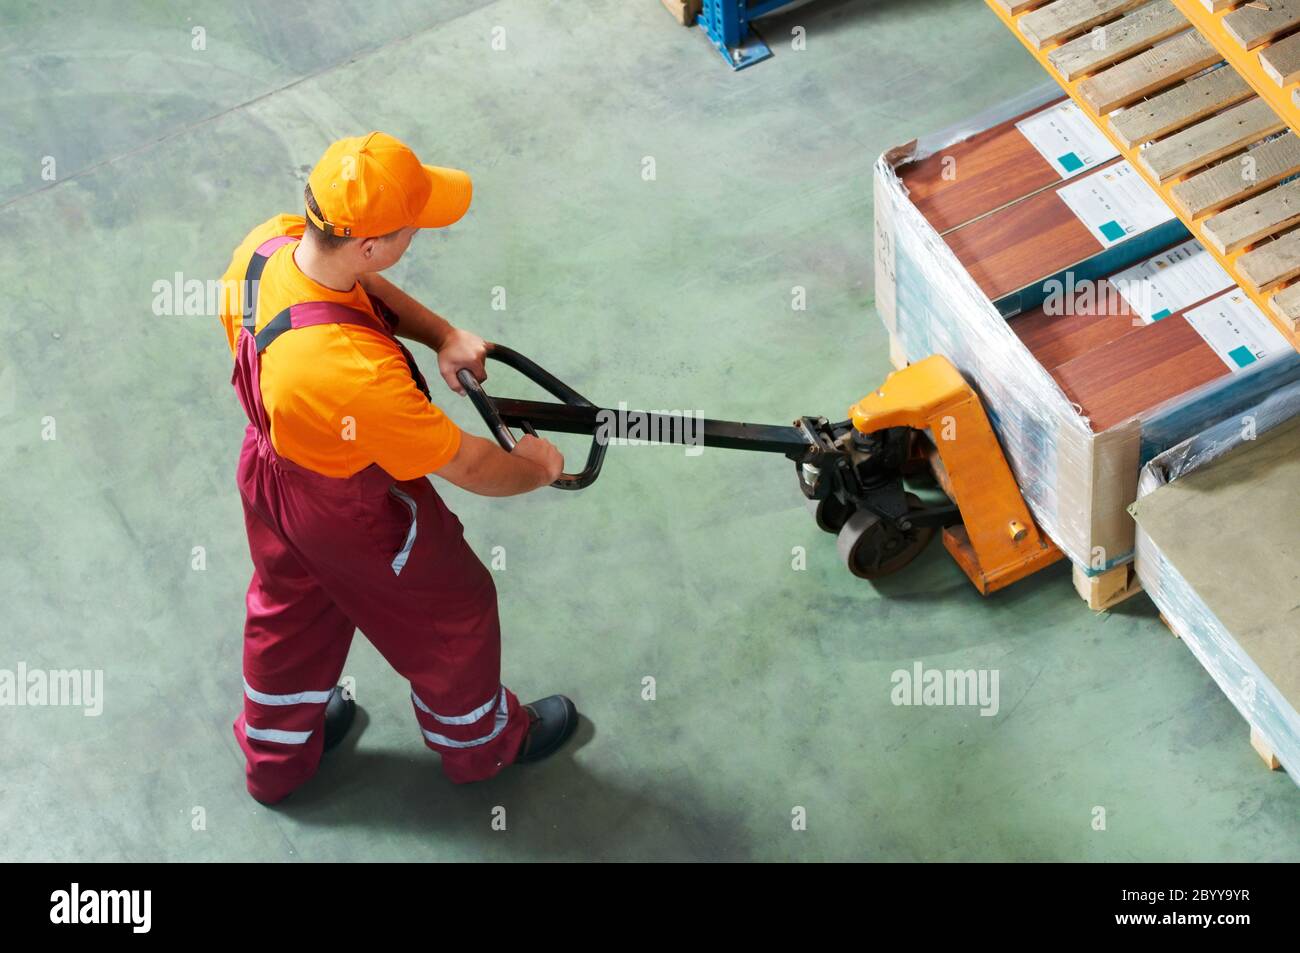 worker with fork pallet truck Stock Photo